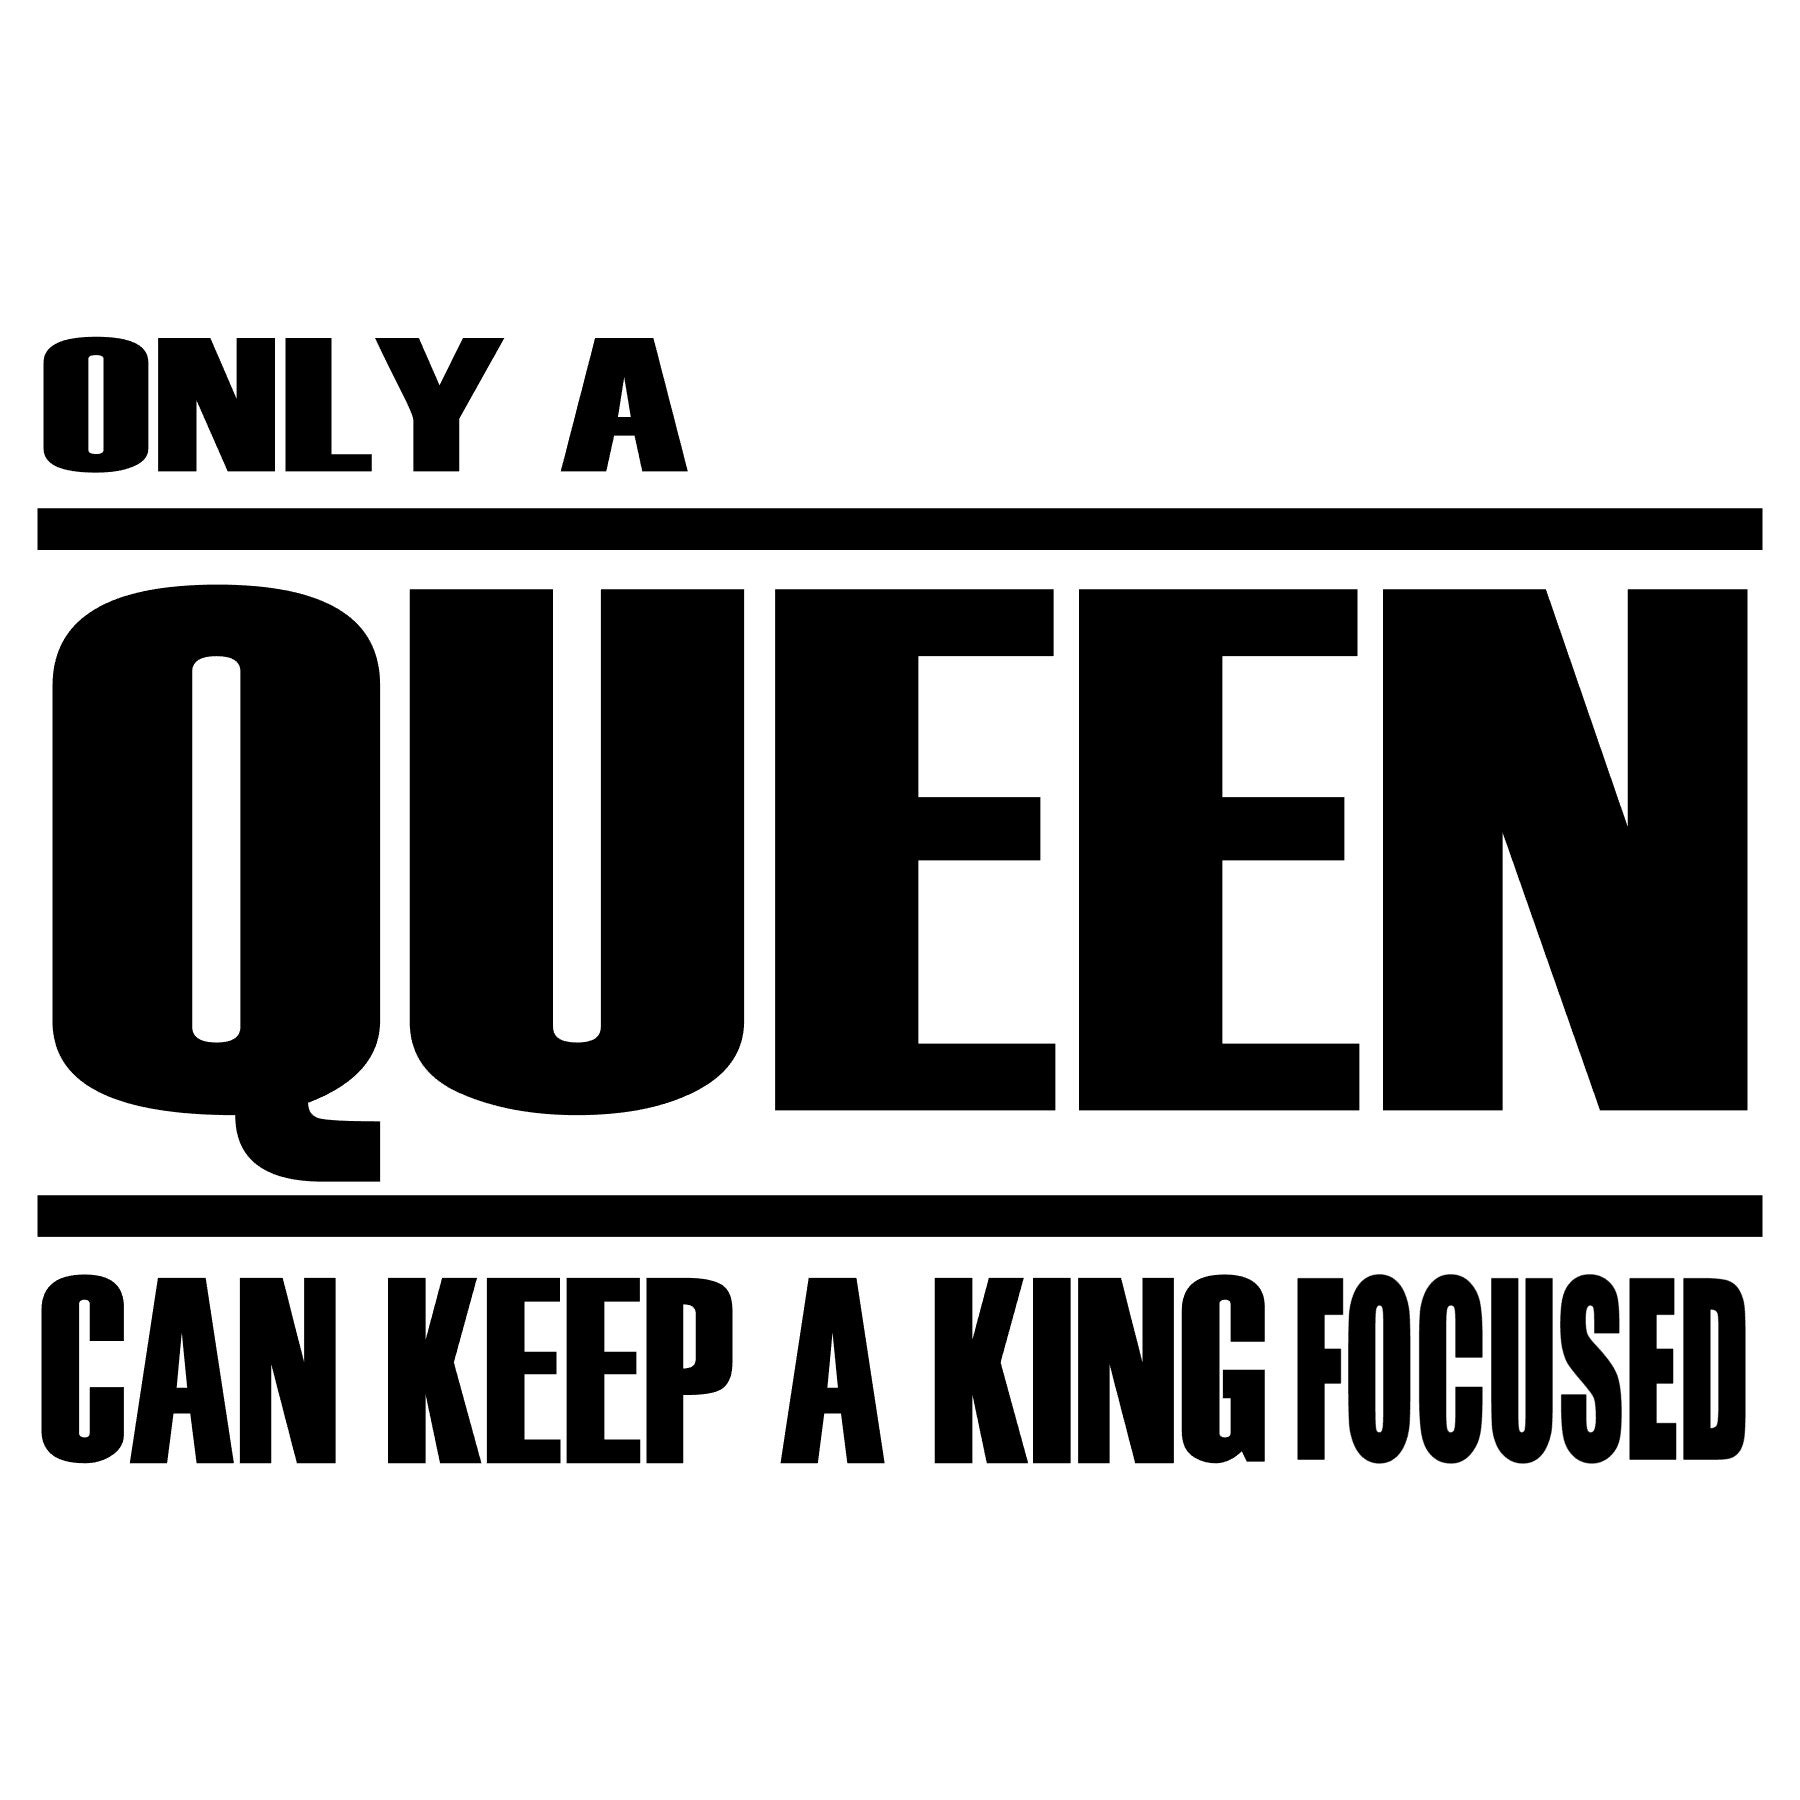 Only a King Can Attract a Queen Svgonly a Queen Can Ceep a 